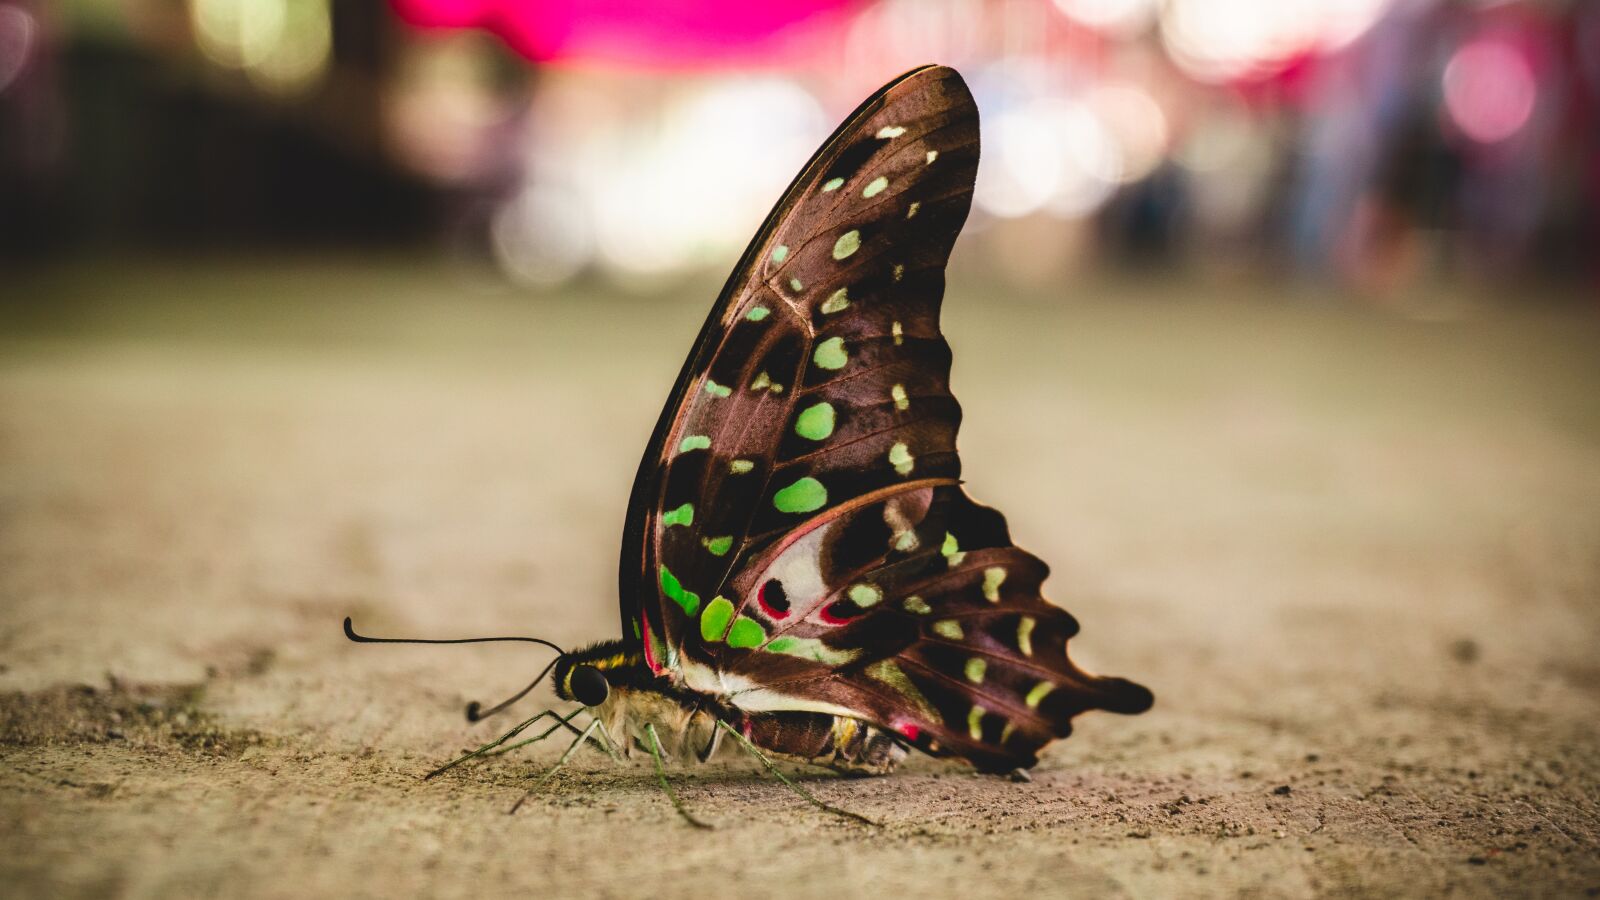 Sony a6000 sample photo. Butterfly, street, insect photography